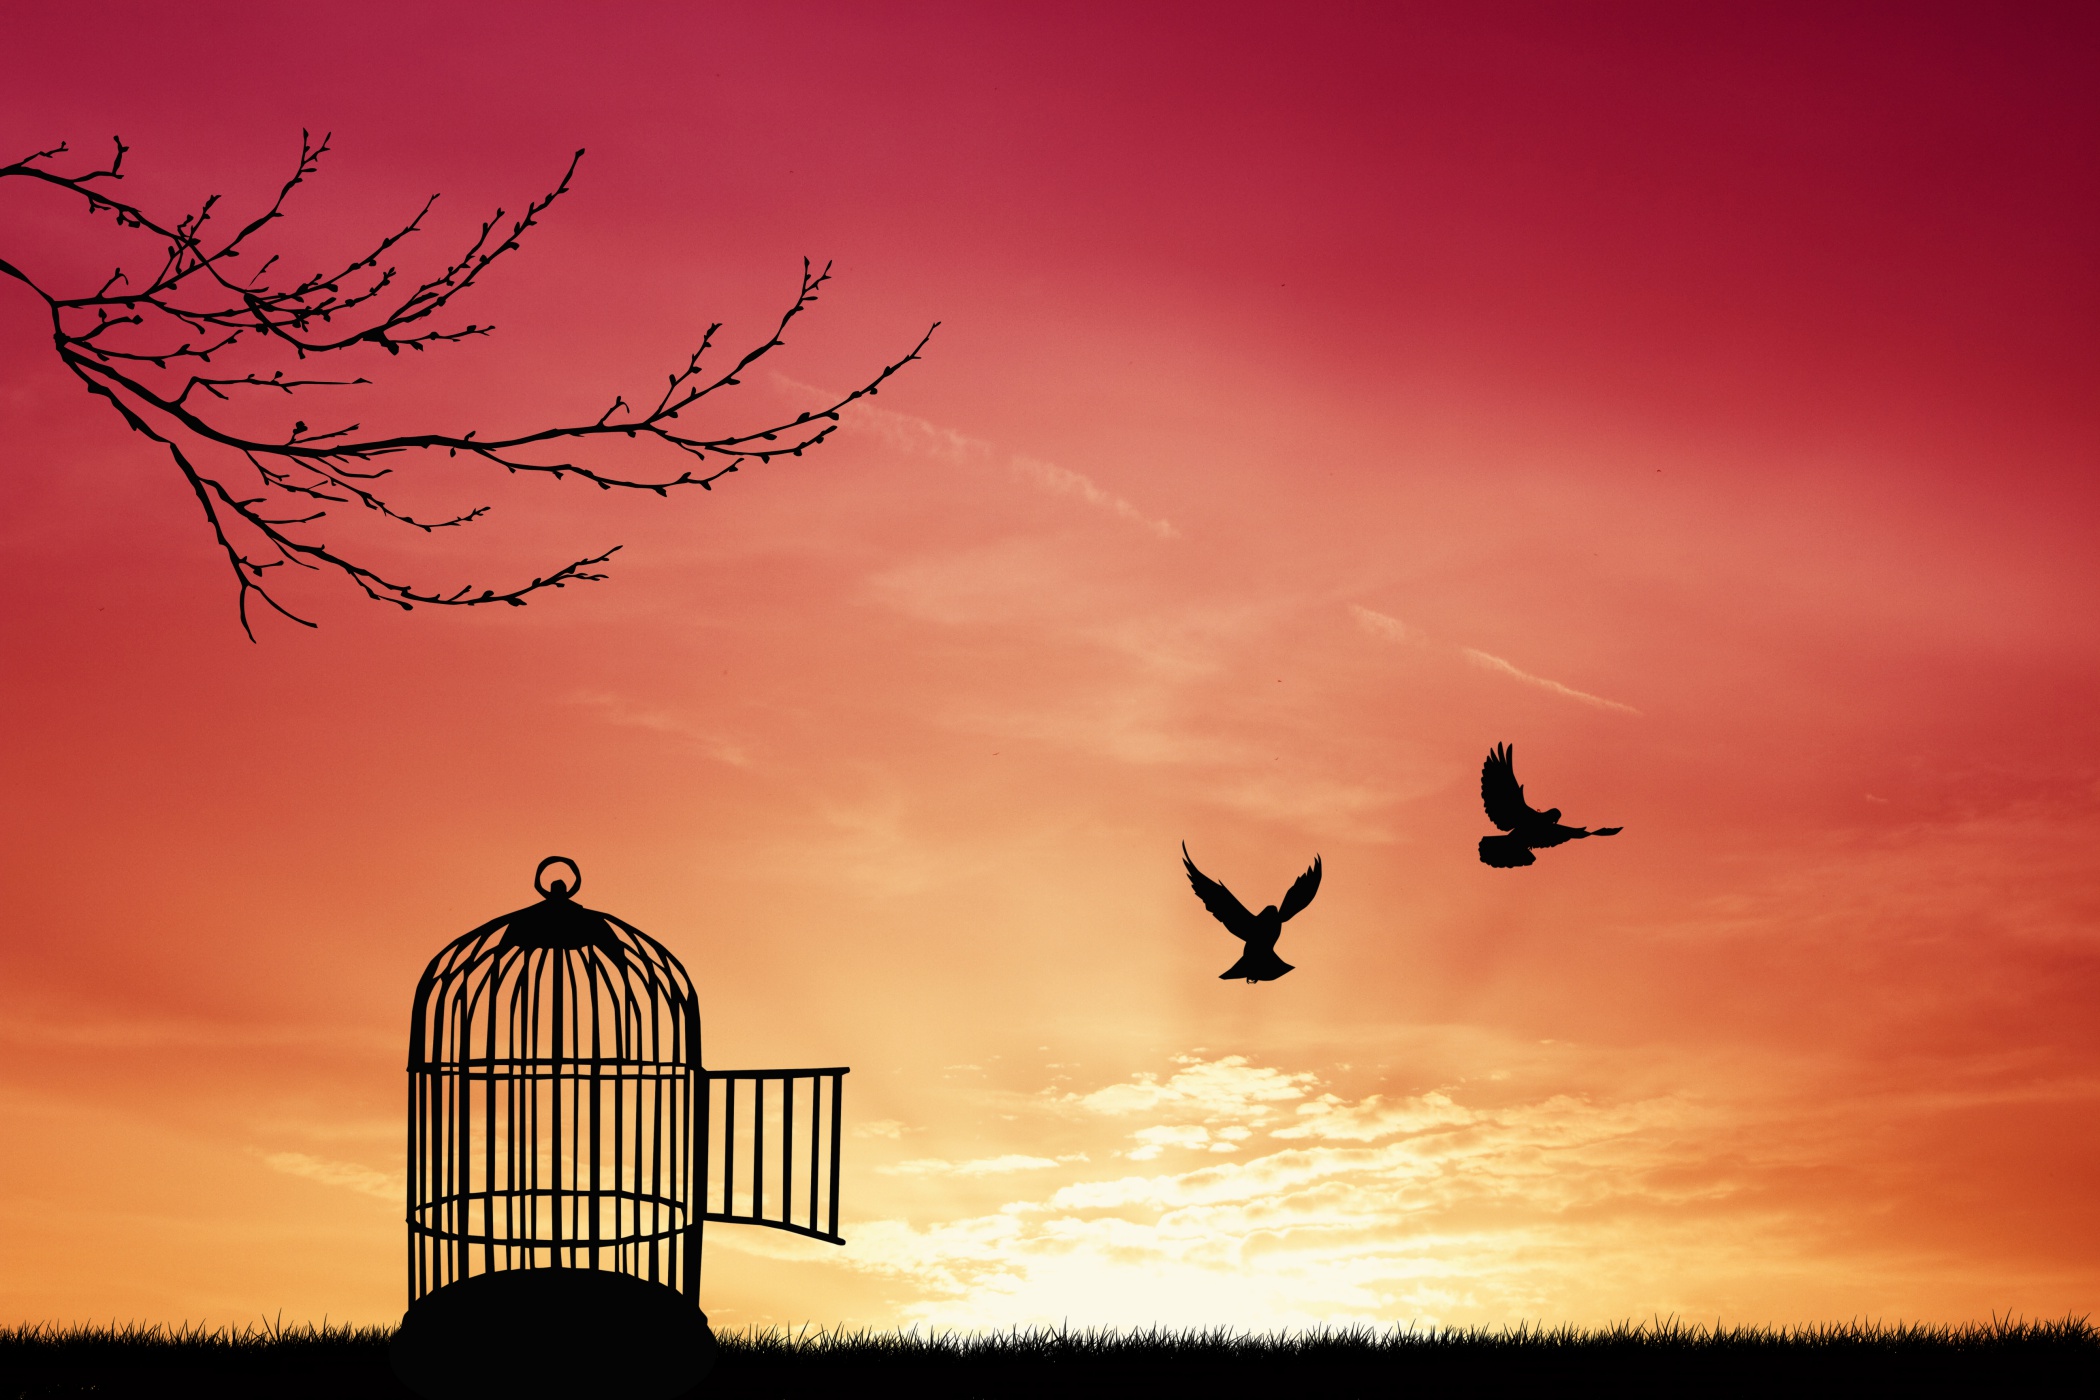 NLP & Hypnosis: The Keys To Your Cage?